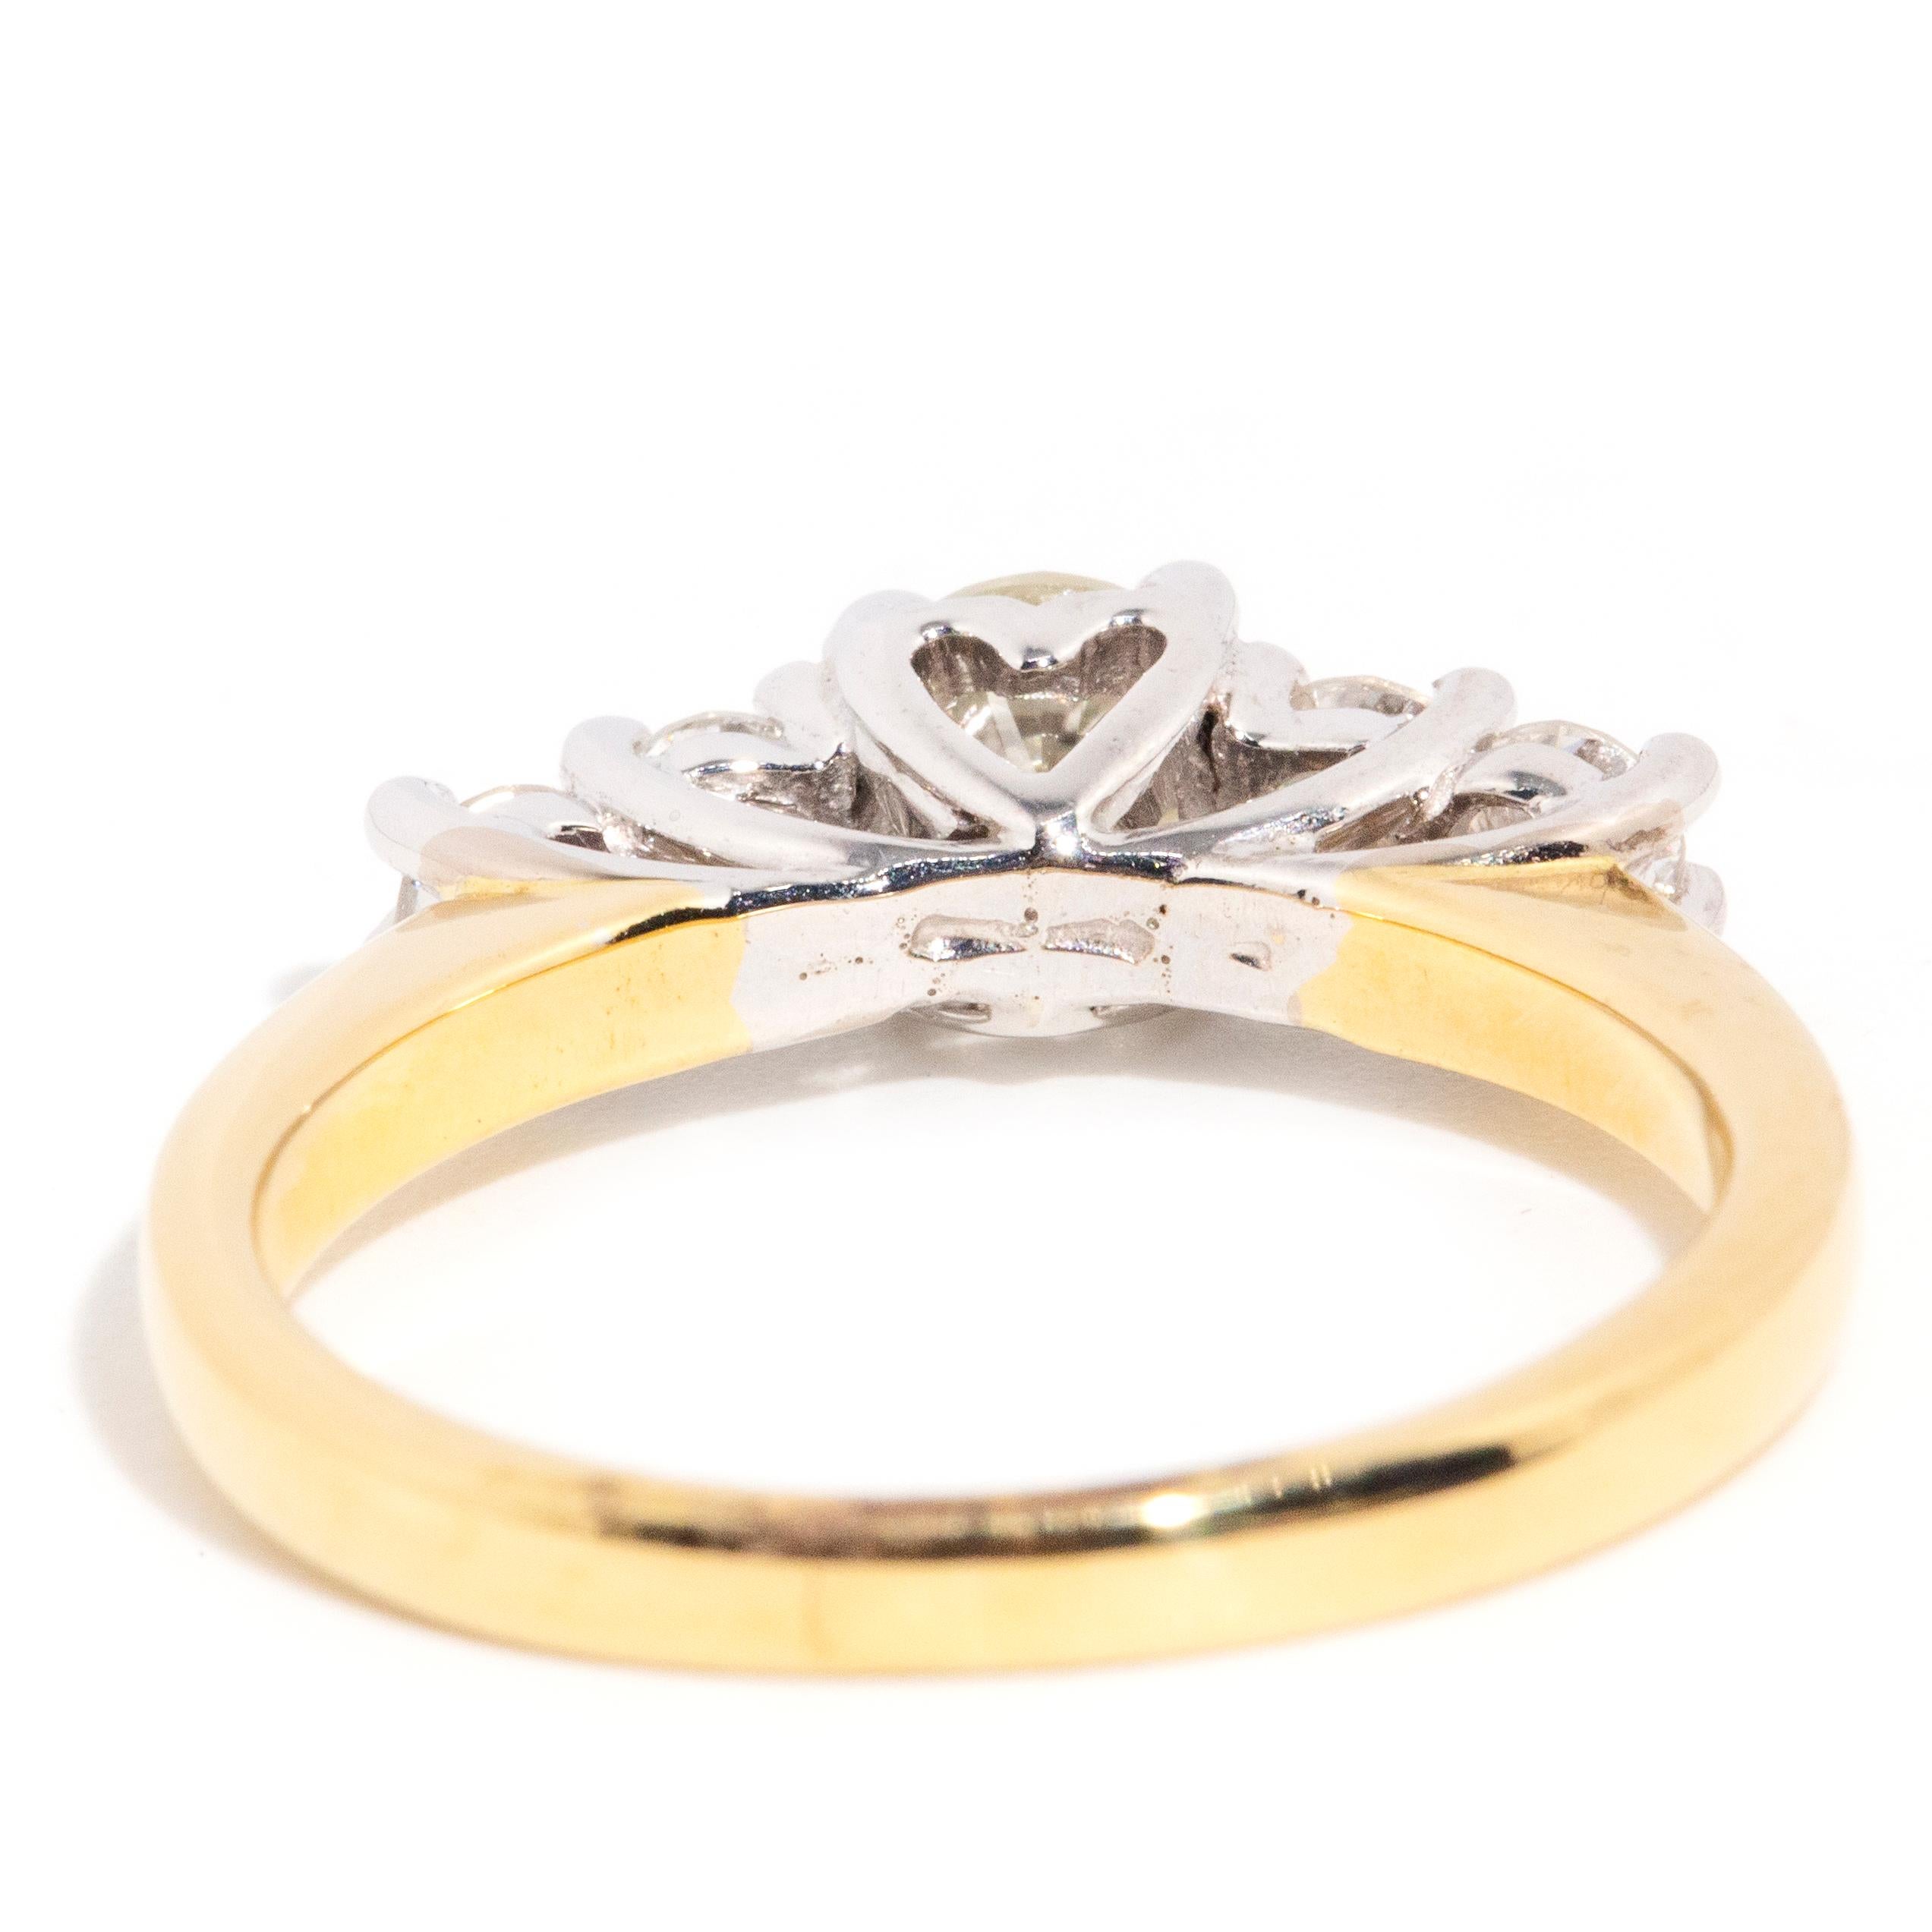 Vintage 18 Carat Yellow and White Gold Five Stone Trellis Setting Diamond Ring For Sale 2